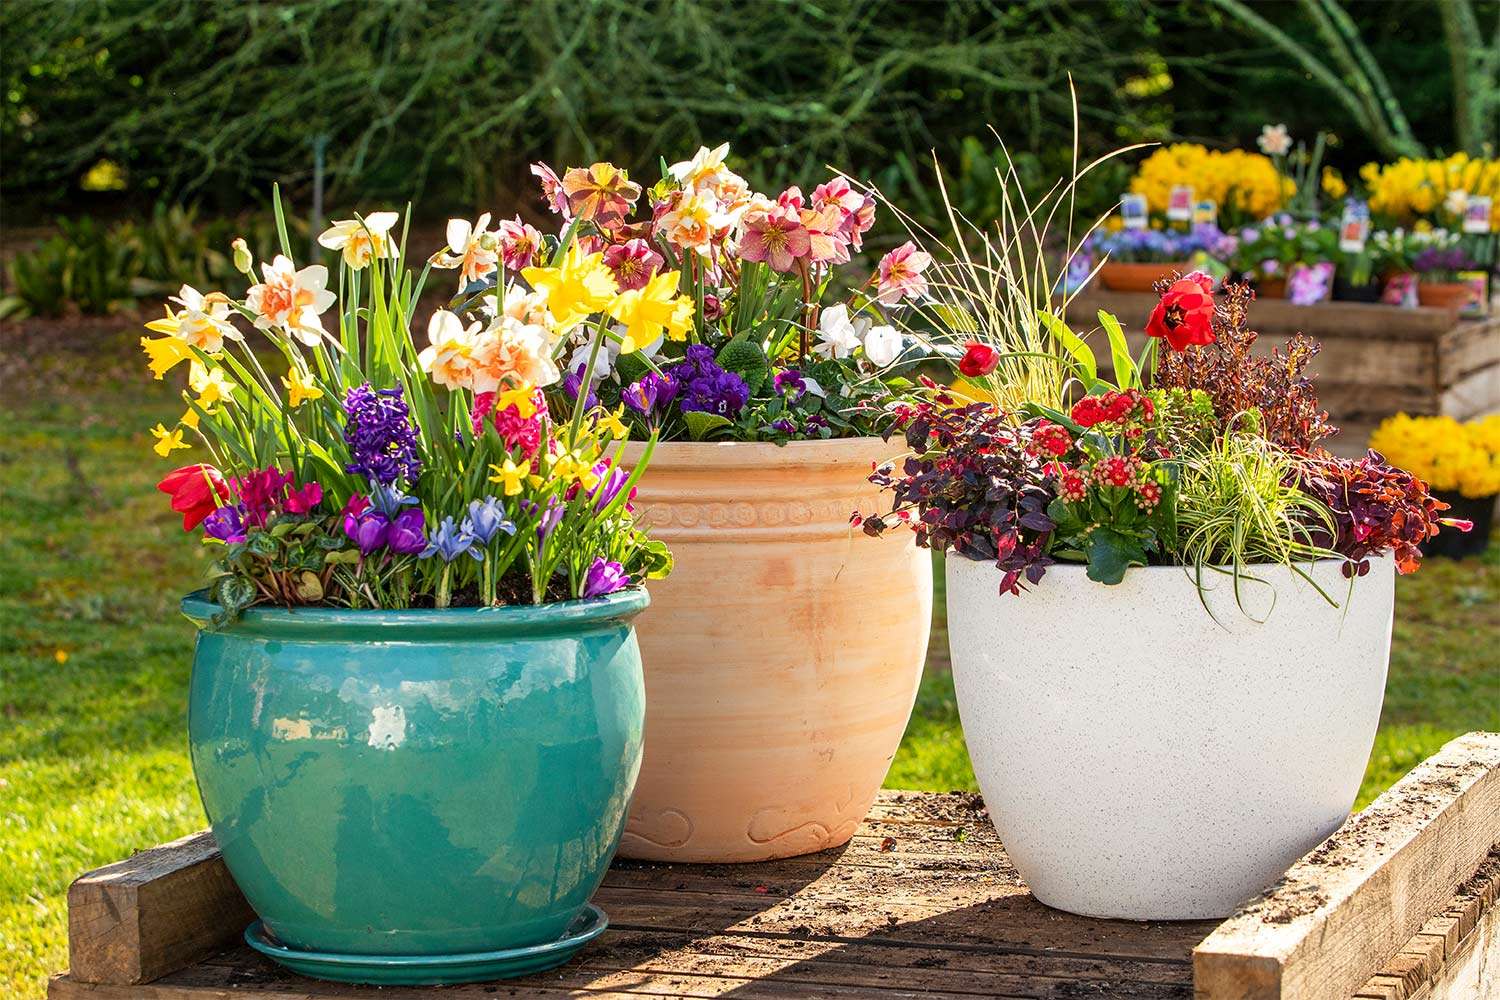 Pots in Bloom puzzle online from photo